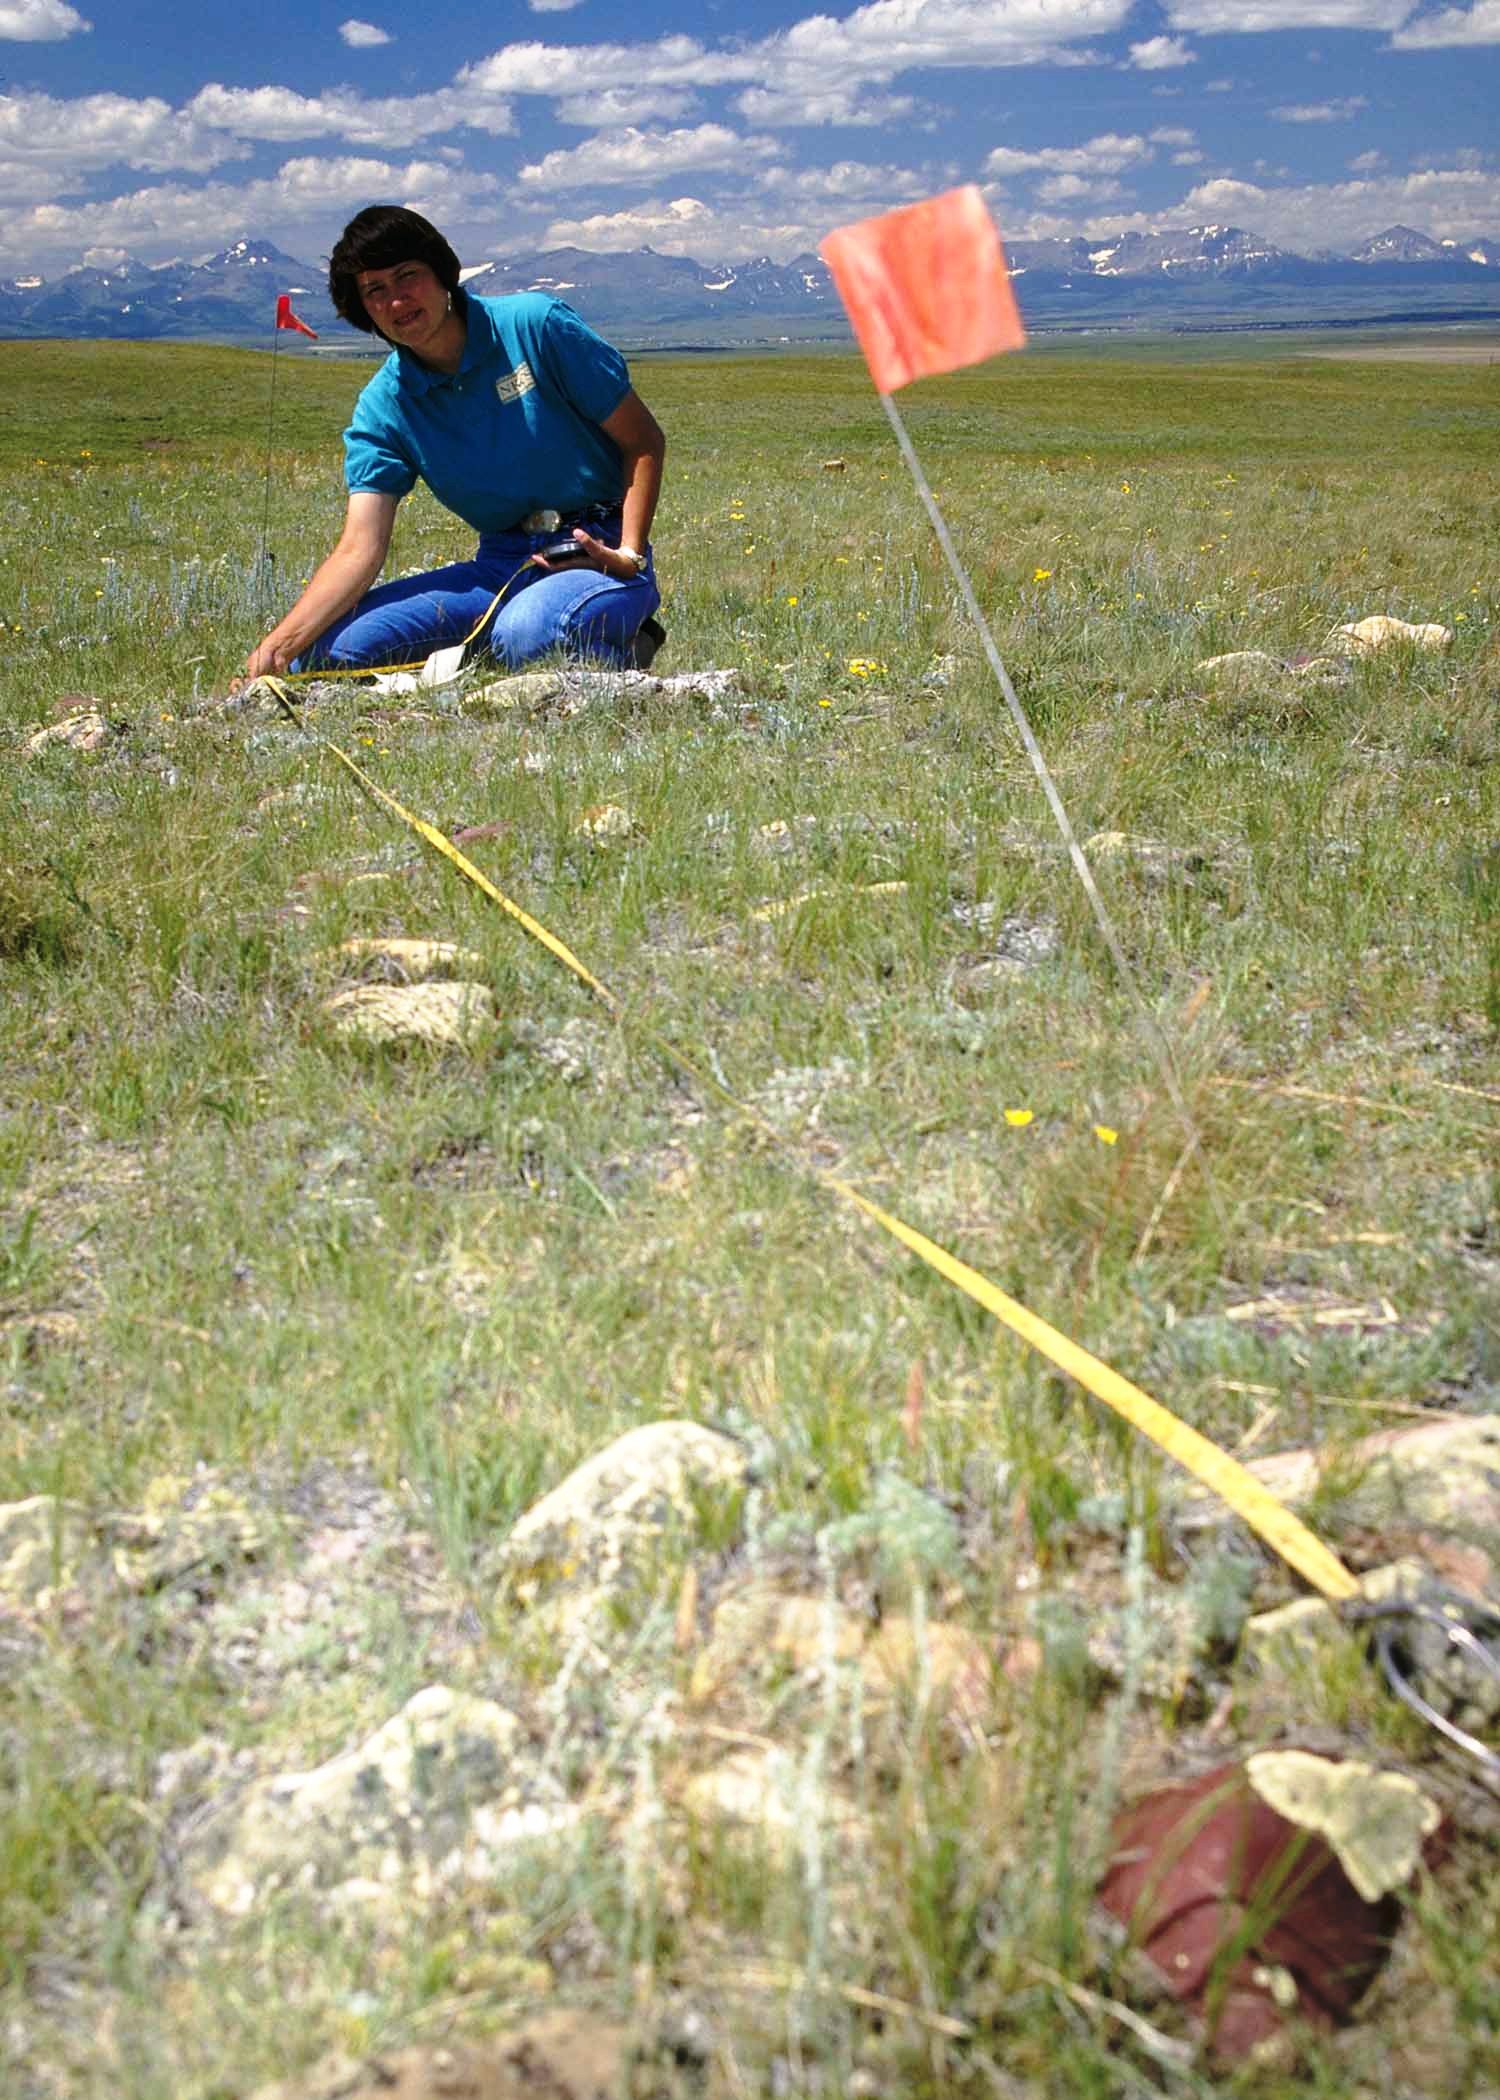 Lady stretching measuring tape from a small flag during field survey.